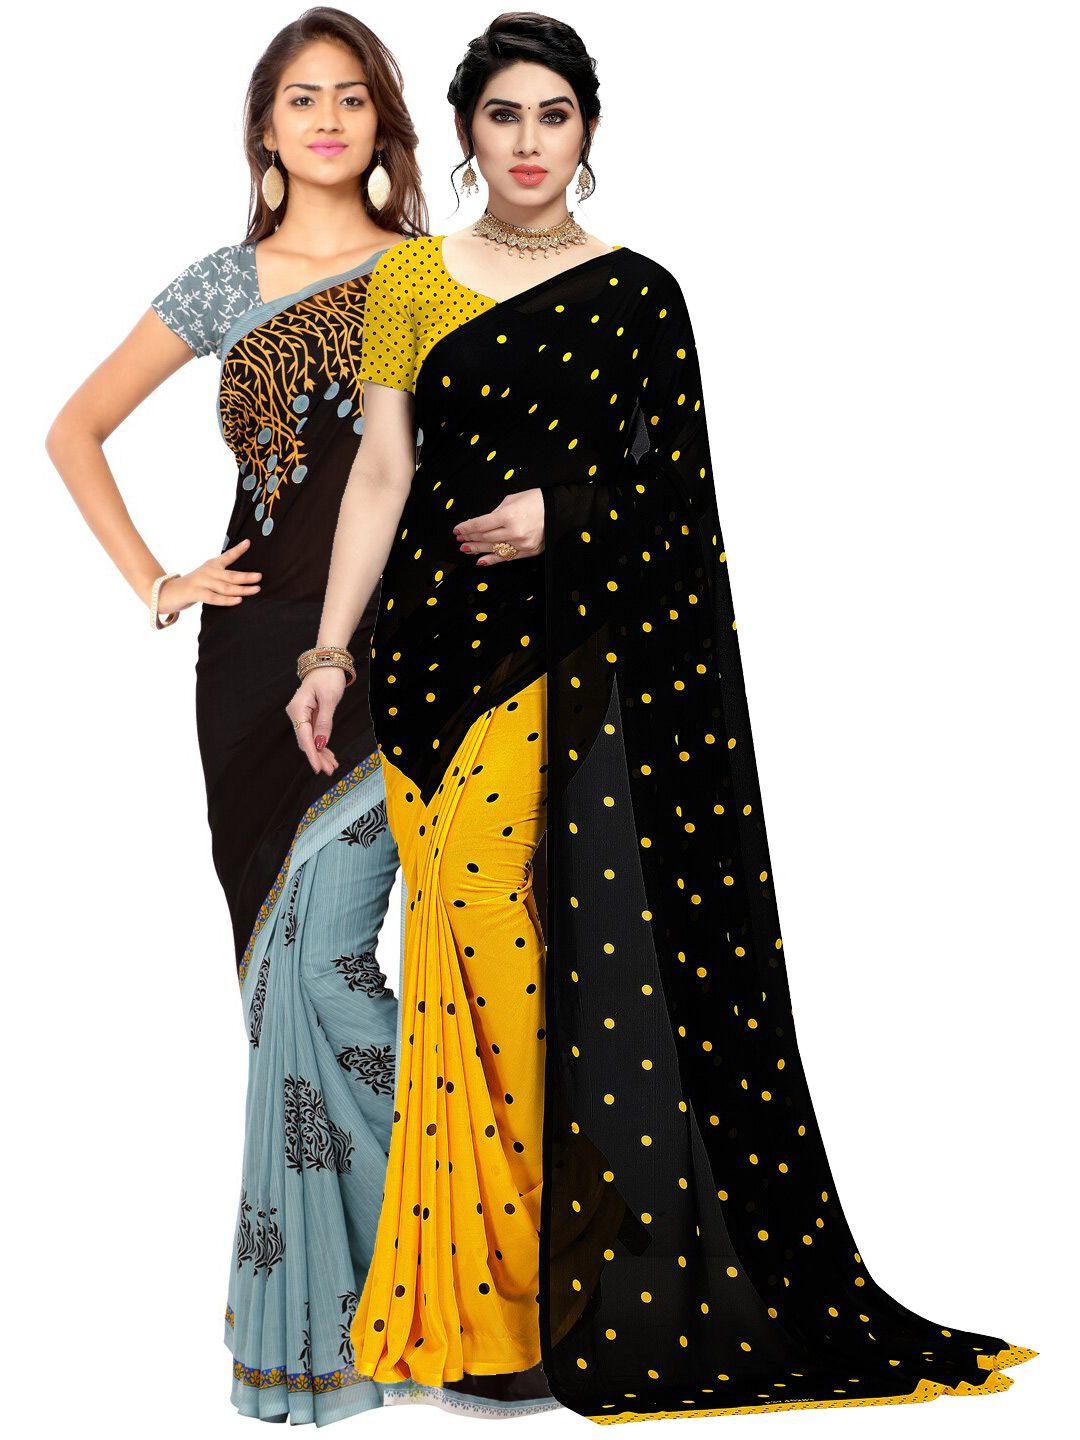 kalini pack of 2 poly georgette saree